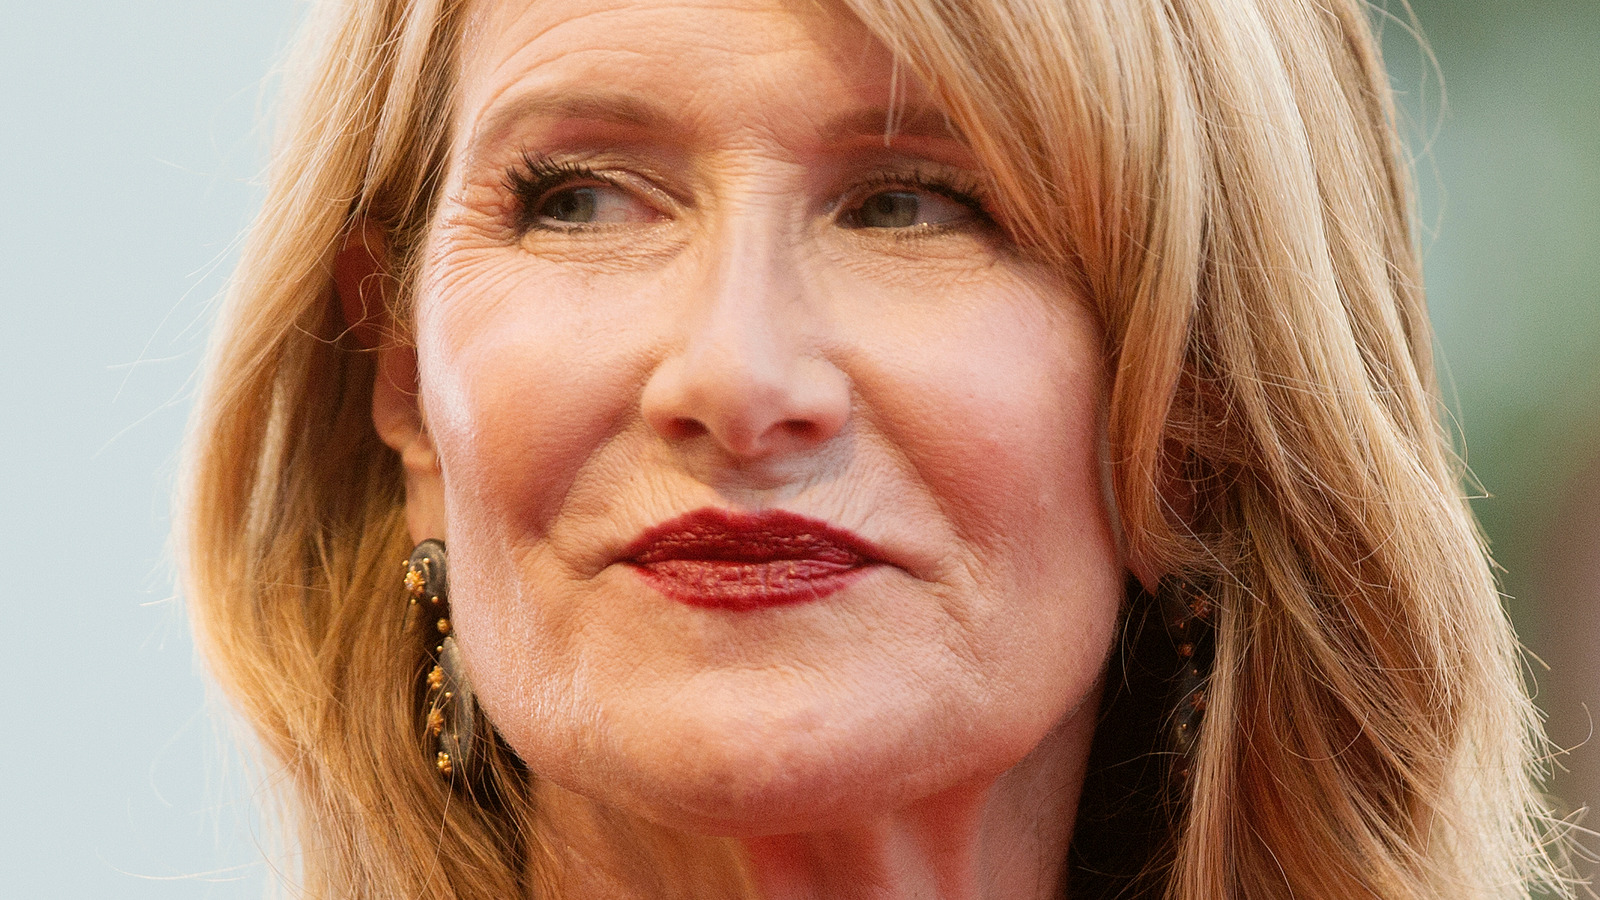 This Is Just To Say Good for You, Laura Dern